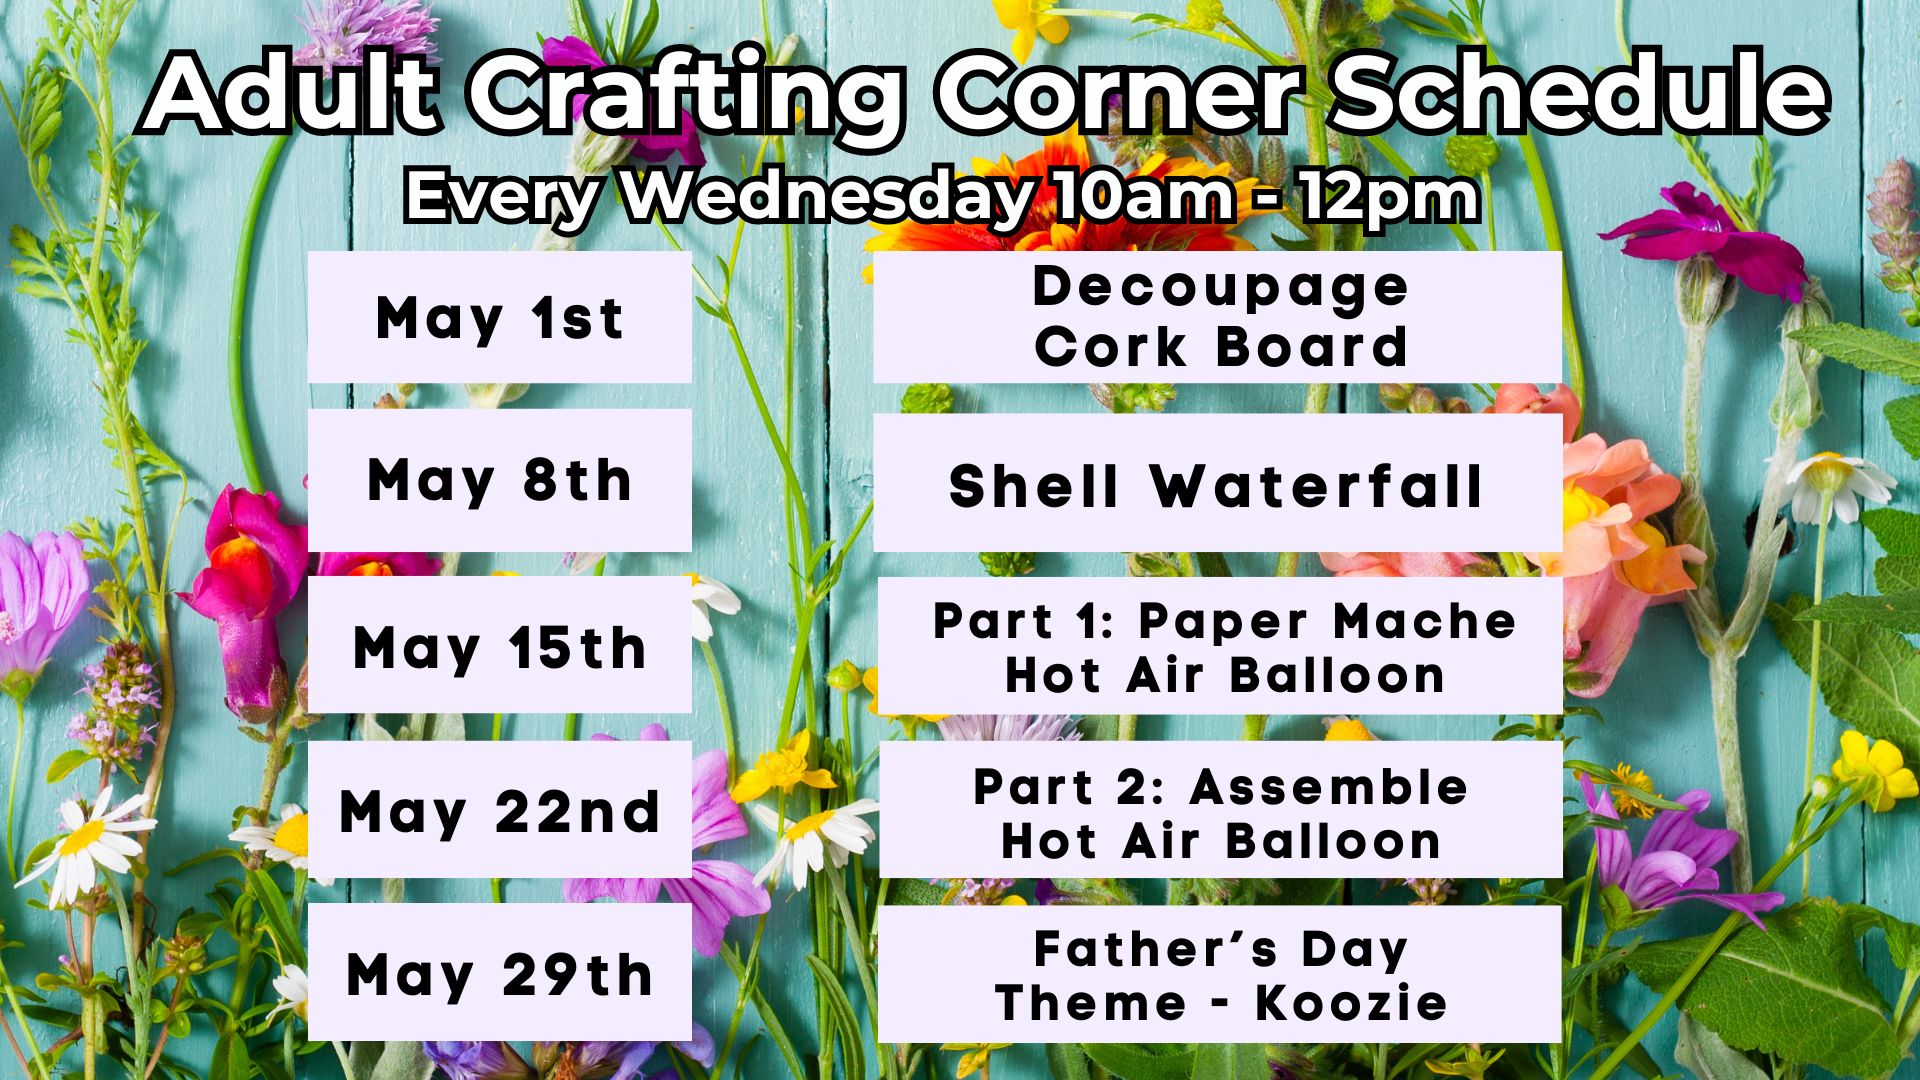 Adult Crafting Corner every Wednesday at 10am at the Key West Library.